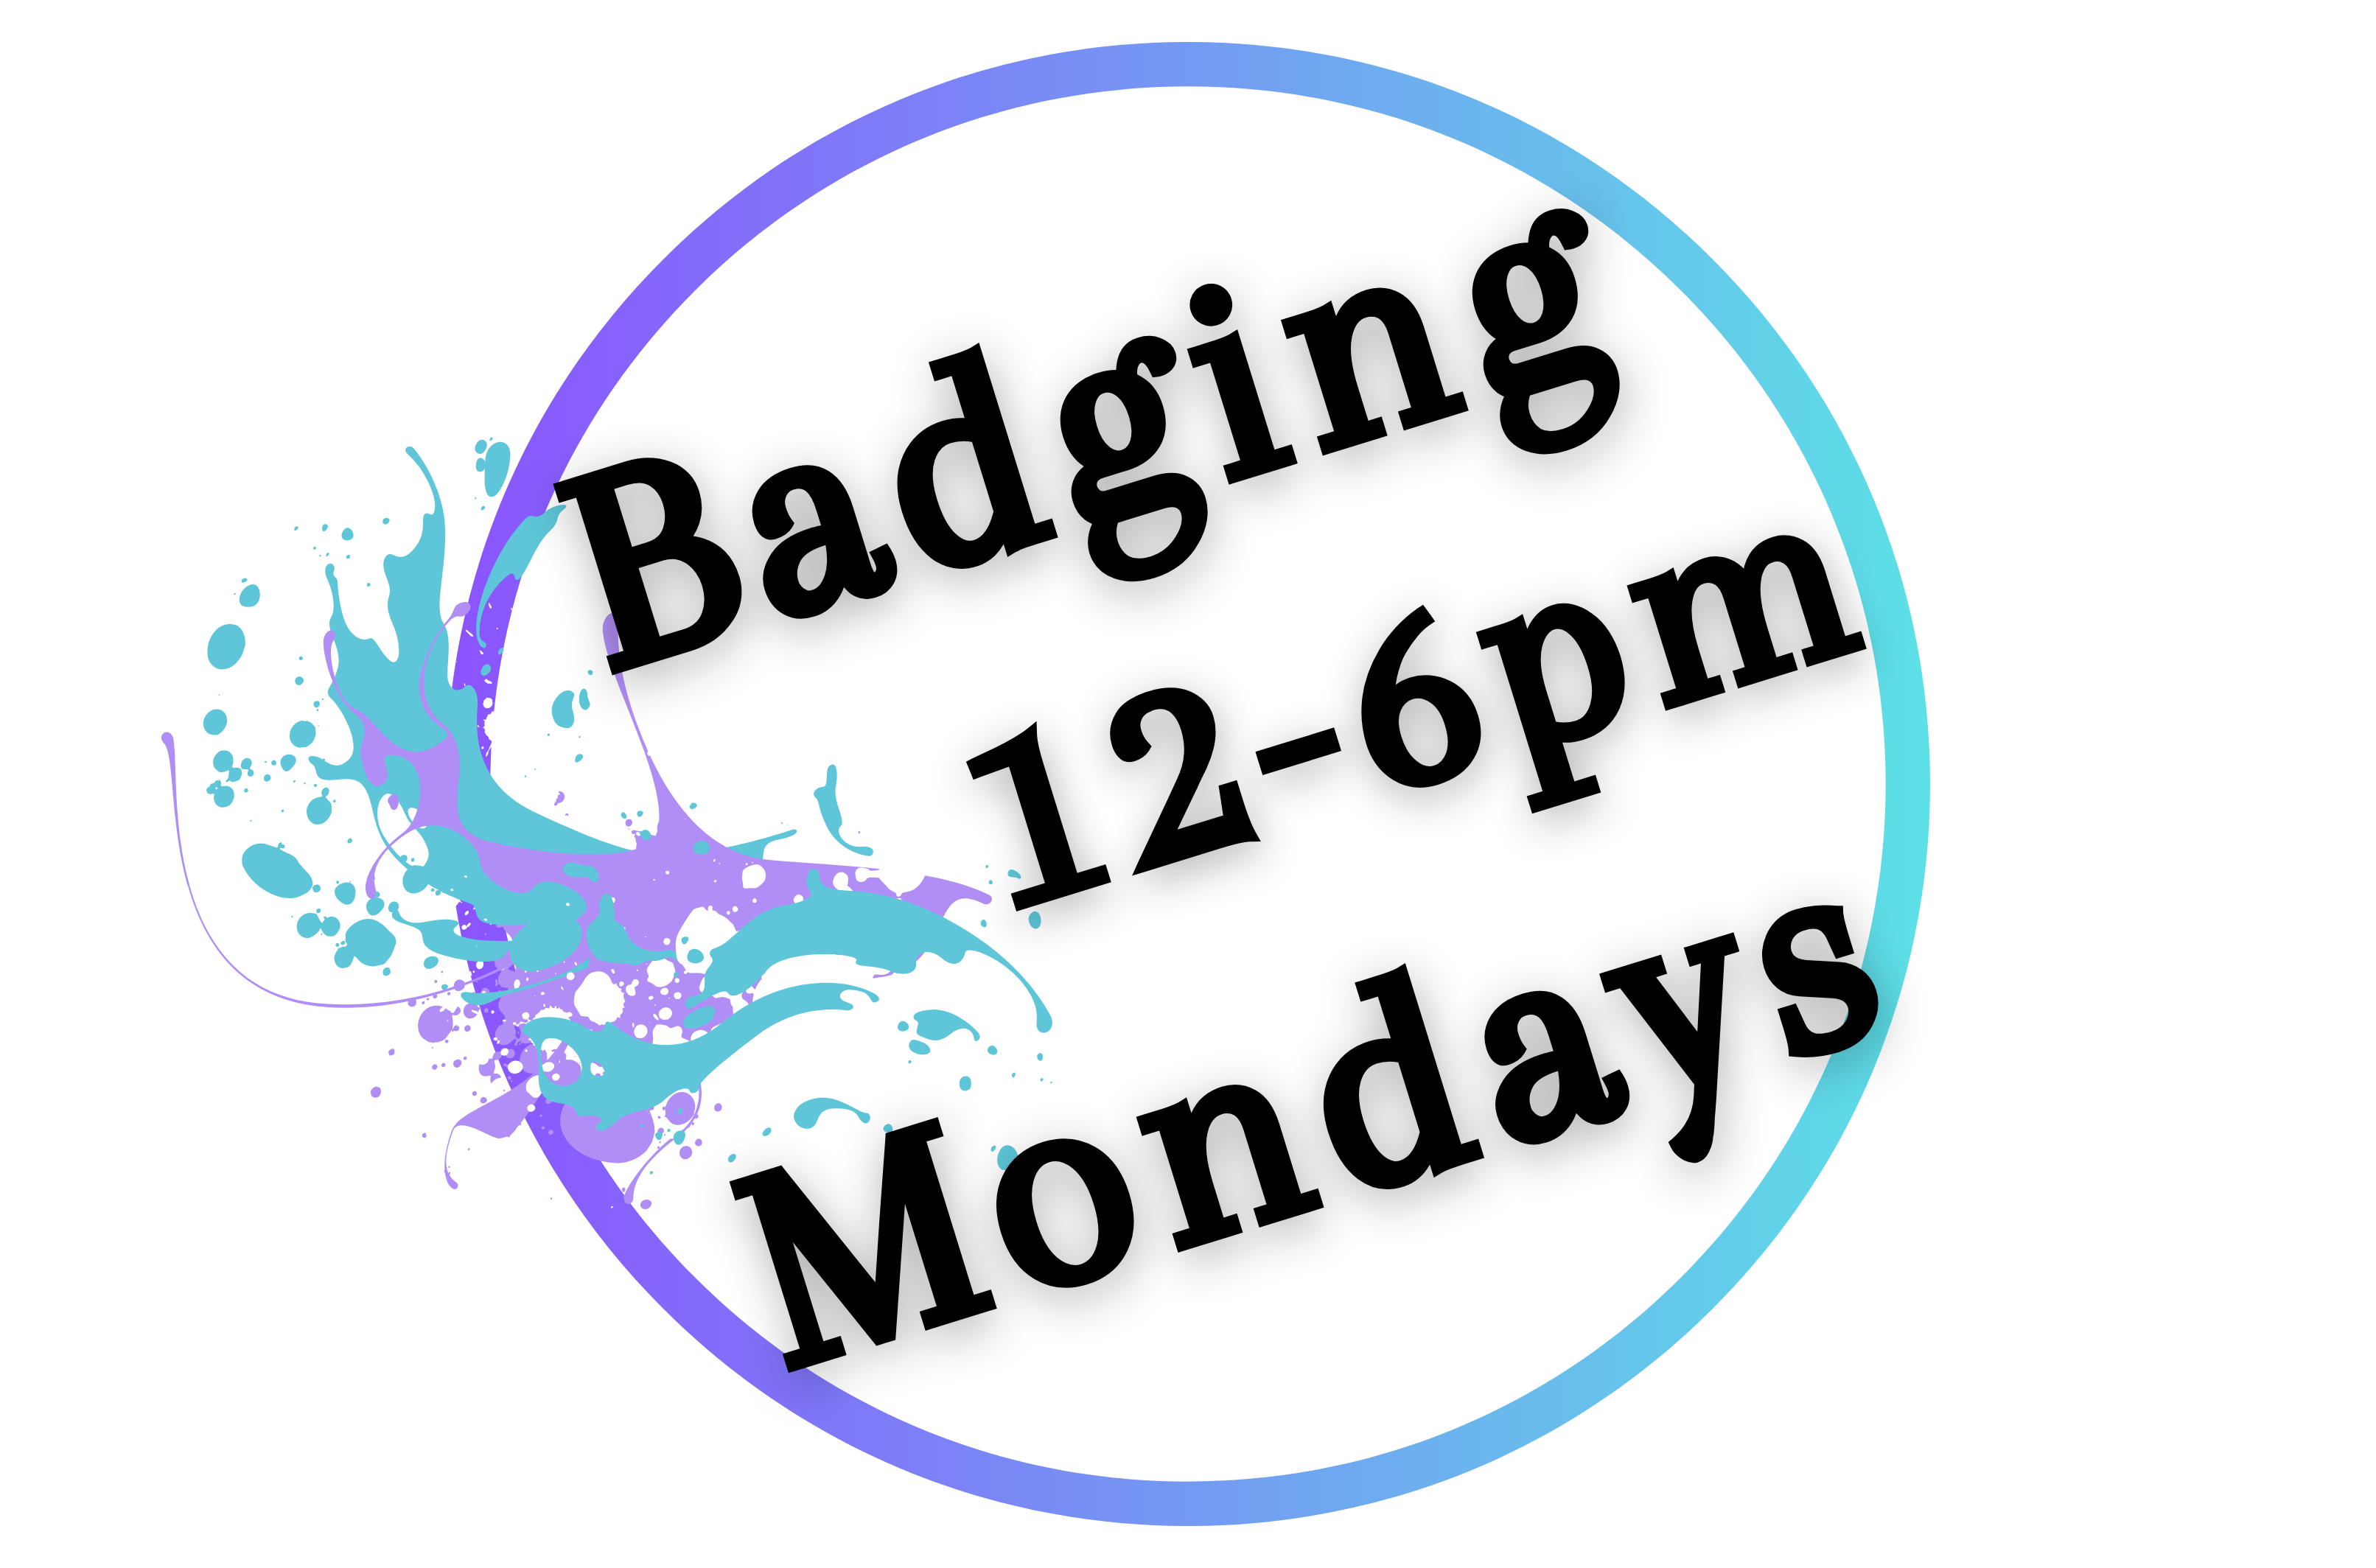 Badging open 12 to 6 pm every Monday